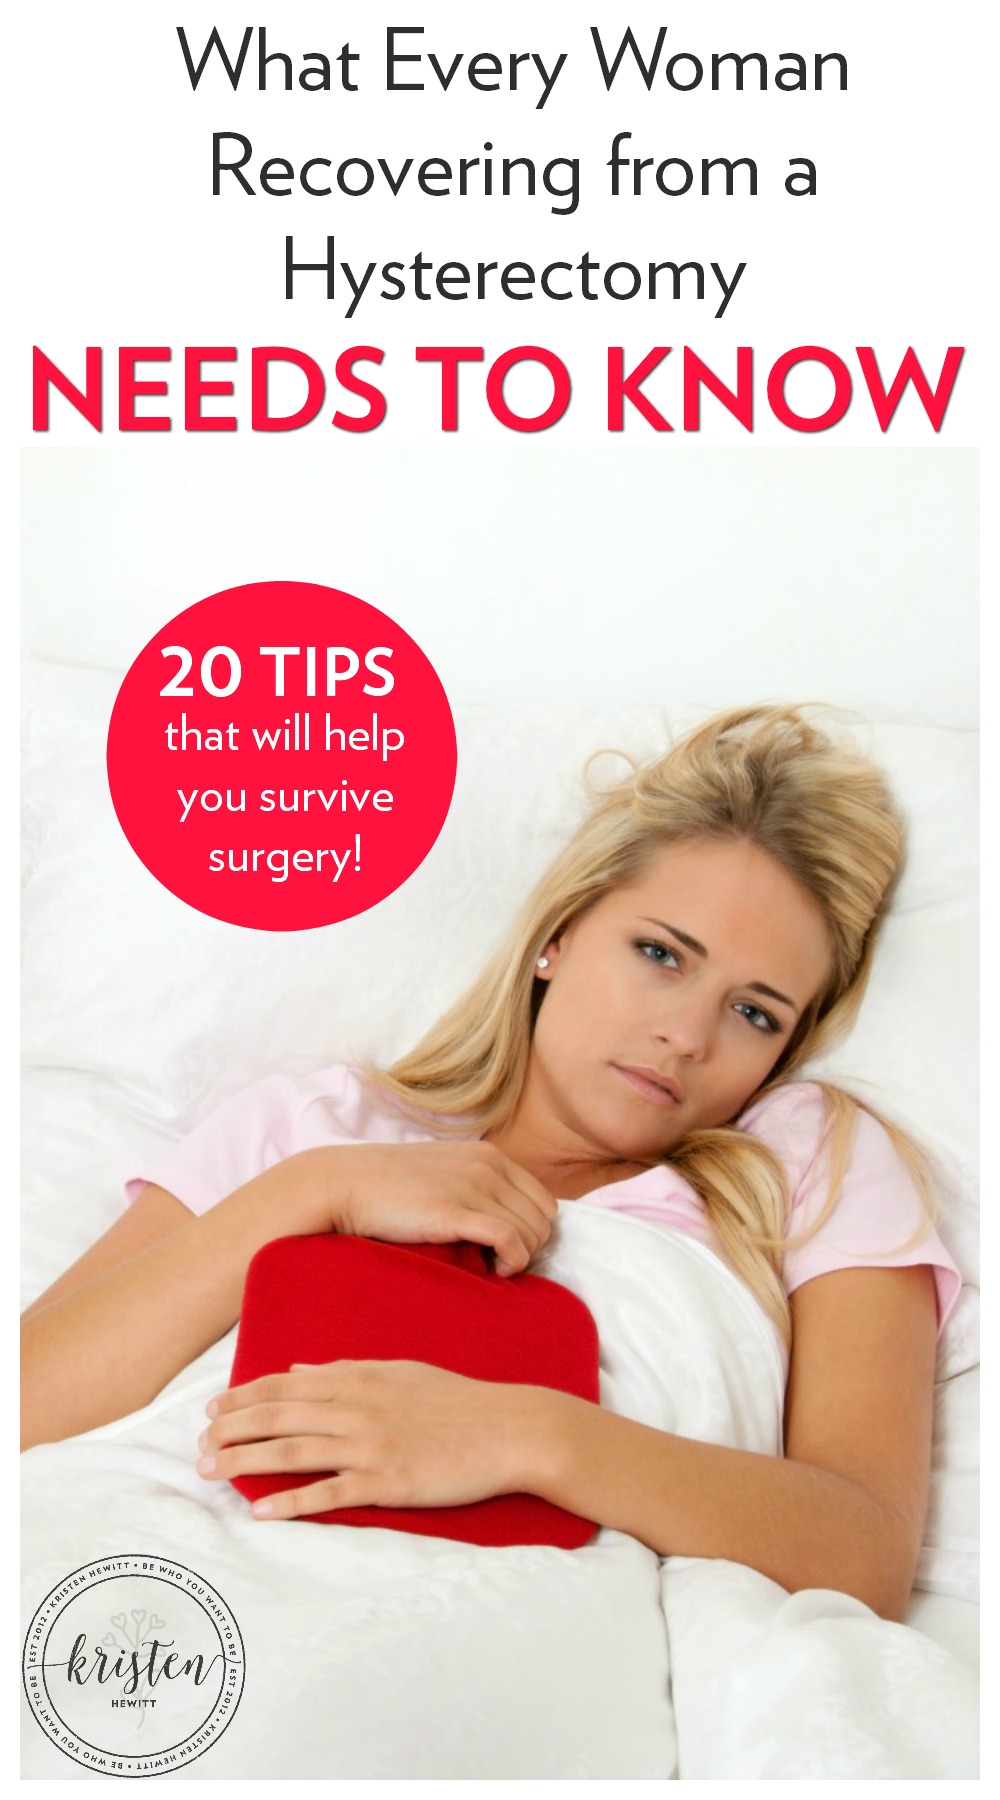 Are you about to have a hysterectomy ore recently recovering? Here are 20 tips and some encouragement every woman needs to read to help you survive surgery and post op!